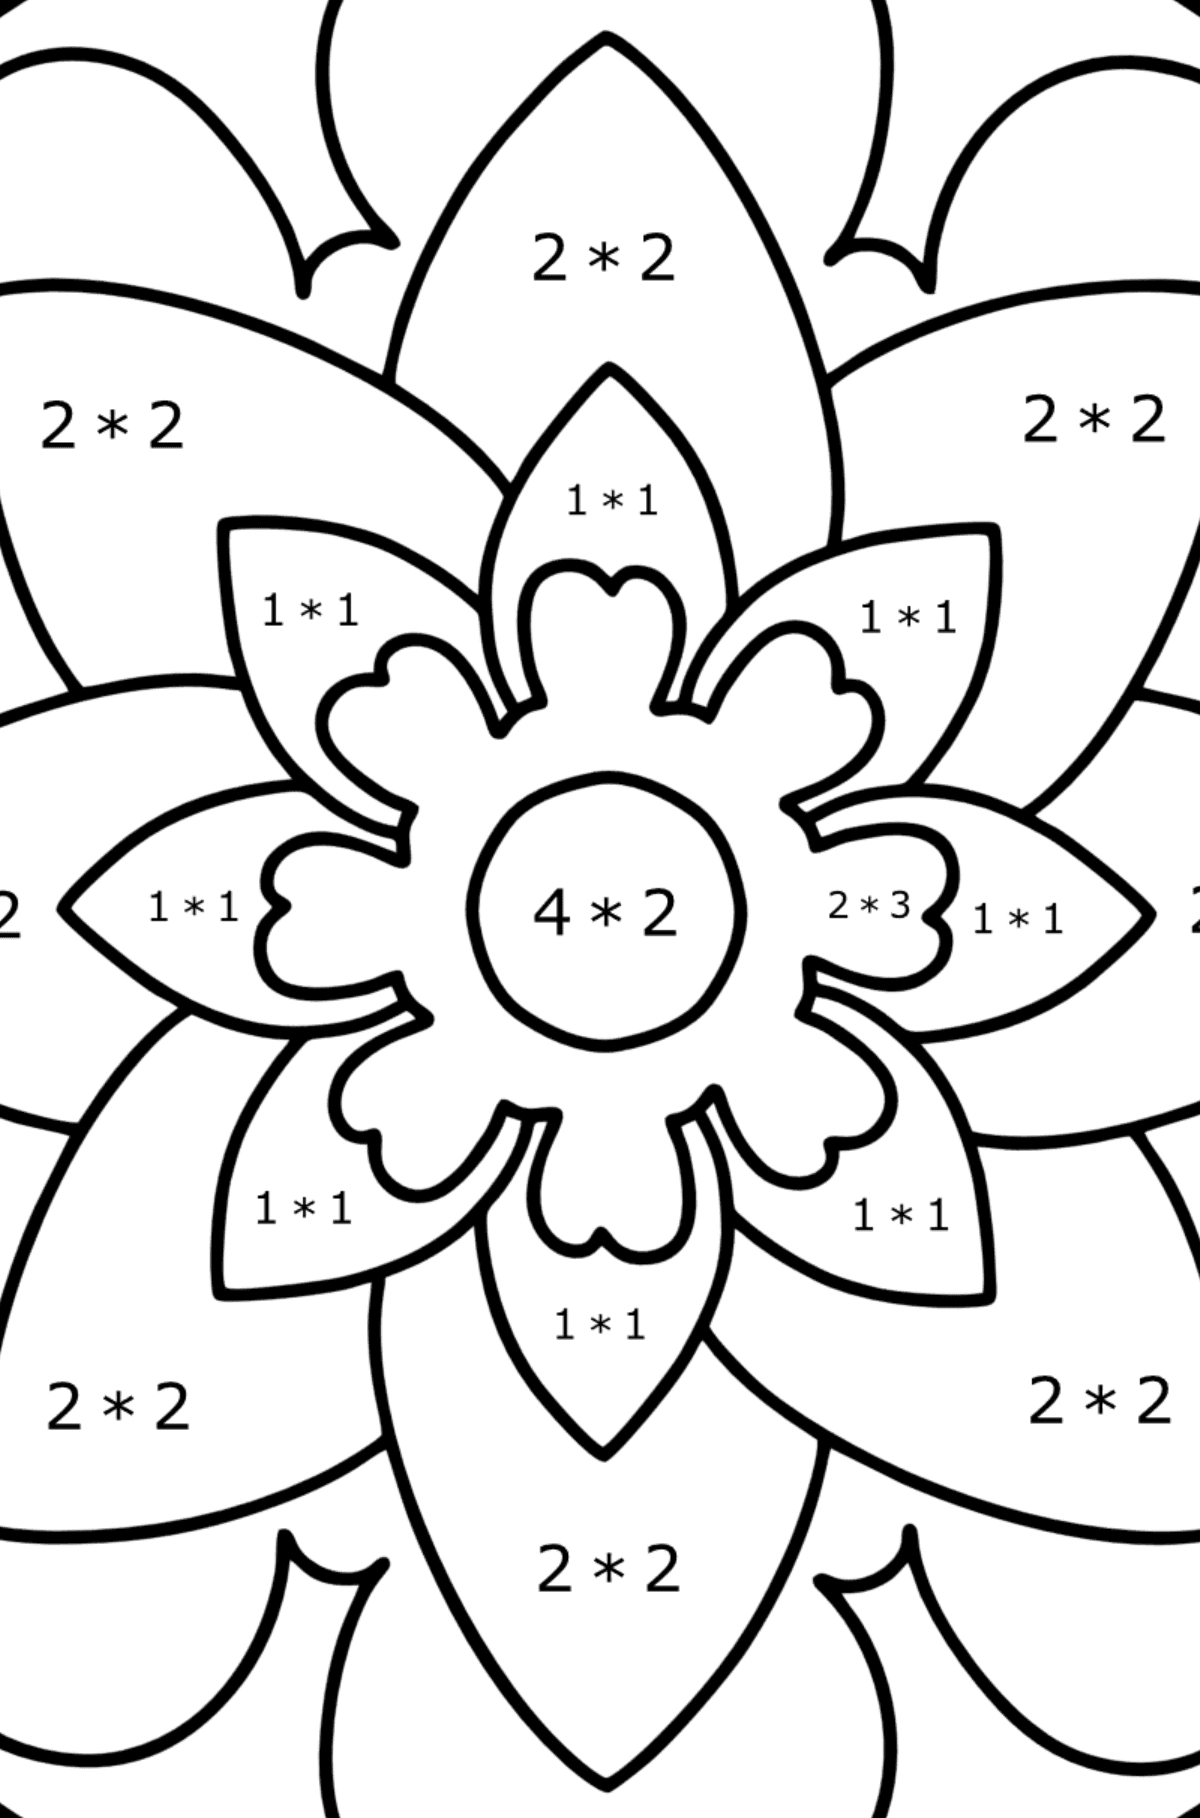 Mandala coloring page - 20 elements - Math Coloring - Multiplication for Kids